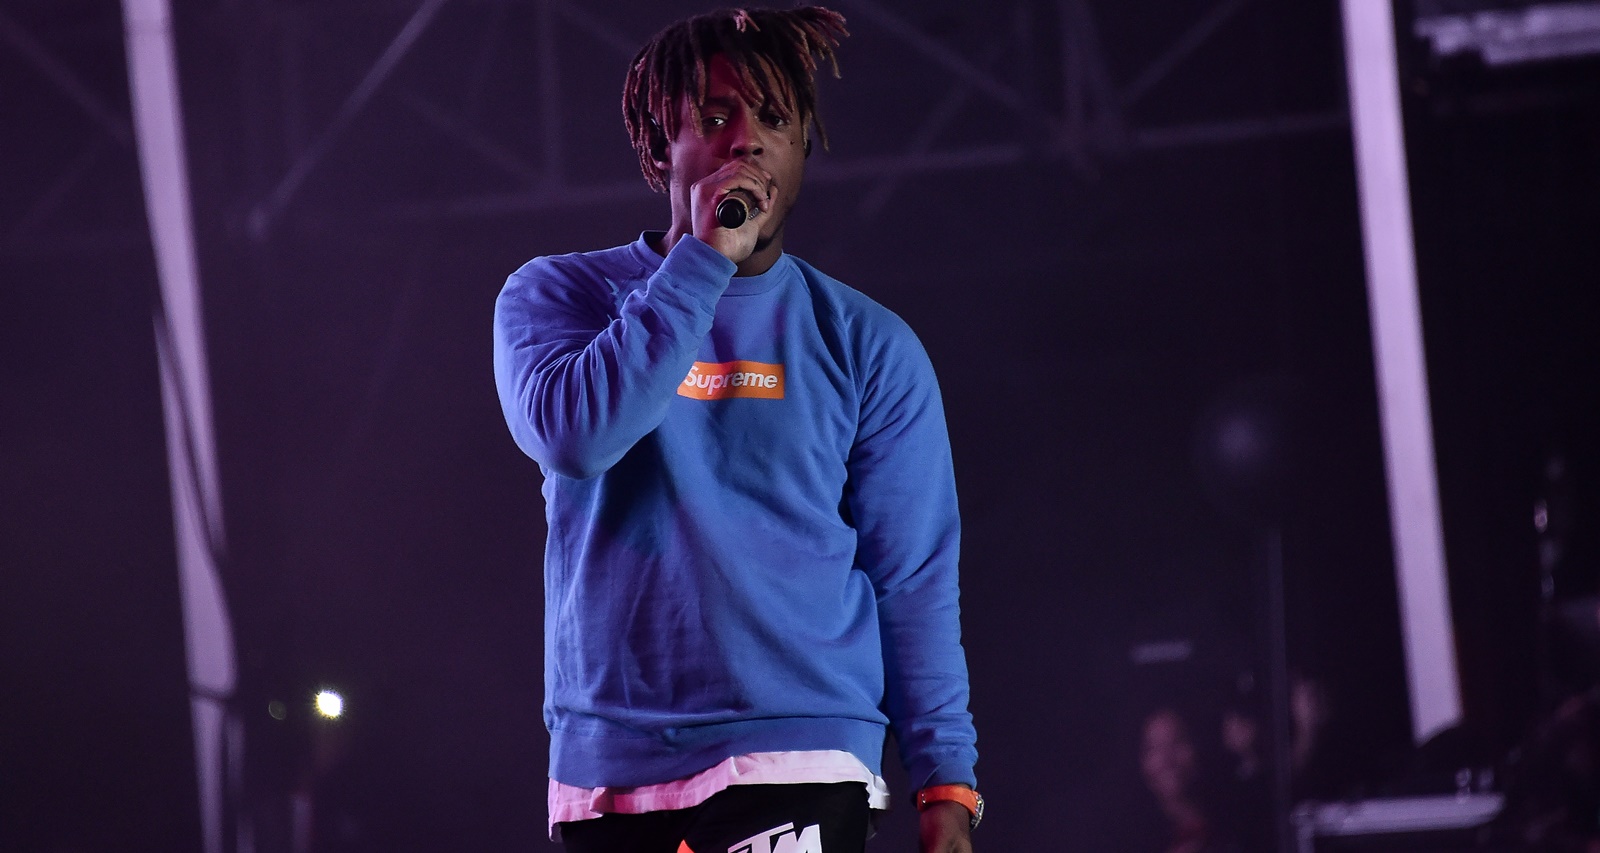 Juice WRLD Net Worth 2019: How Rich Was the “Lucid Dreams” Rapper at the Time of His Death?